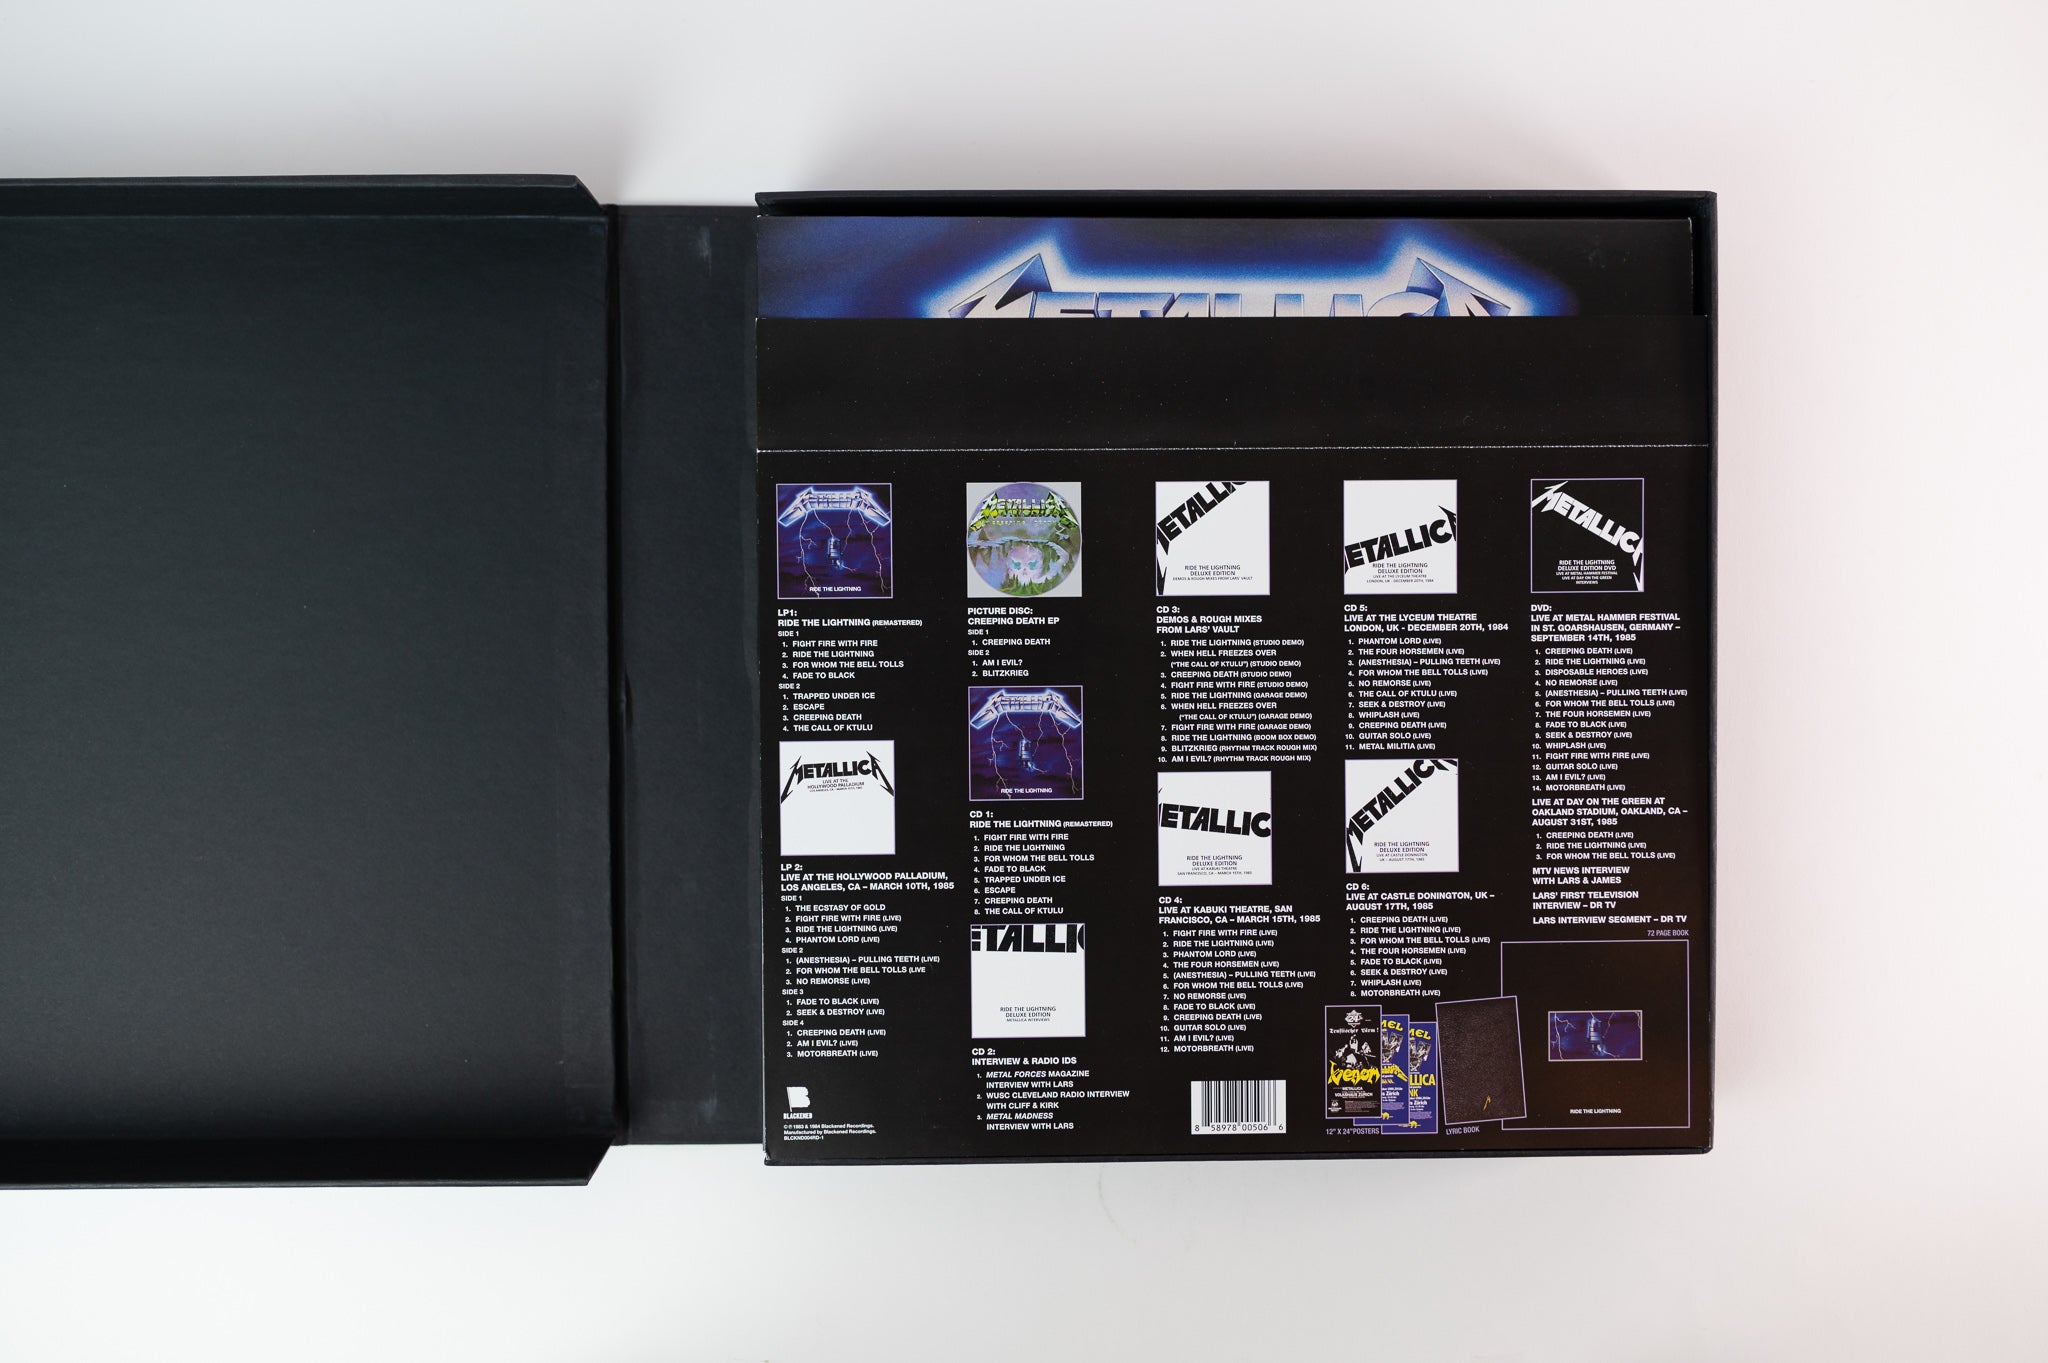 Metallica - Ride The Lightning on Blackened Limited Numbered Deluxe Edition Reissue Box Set